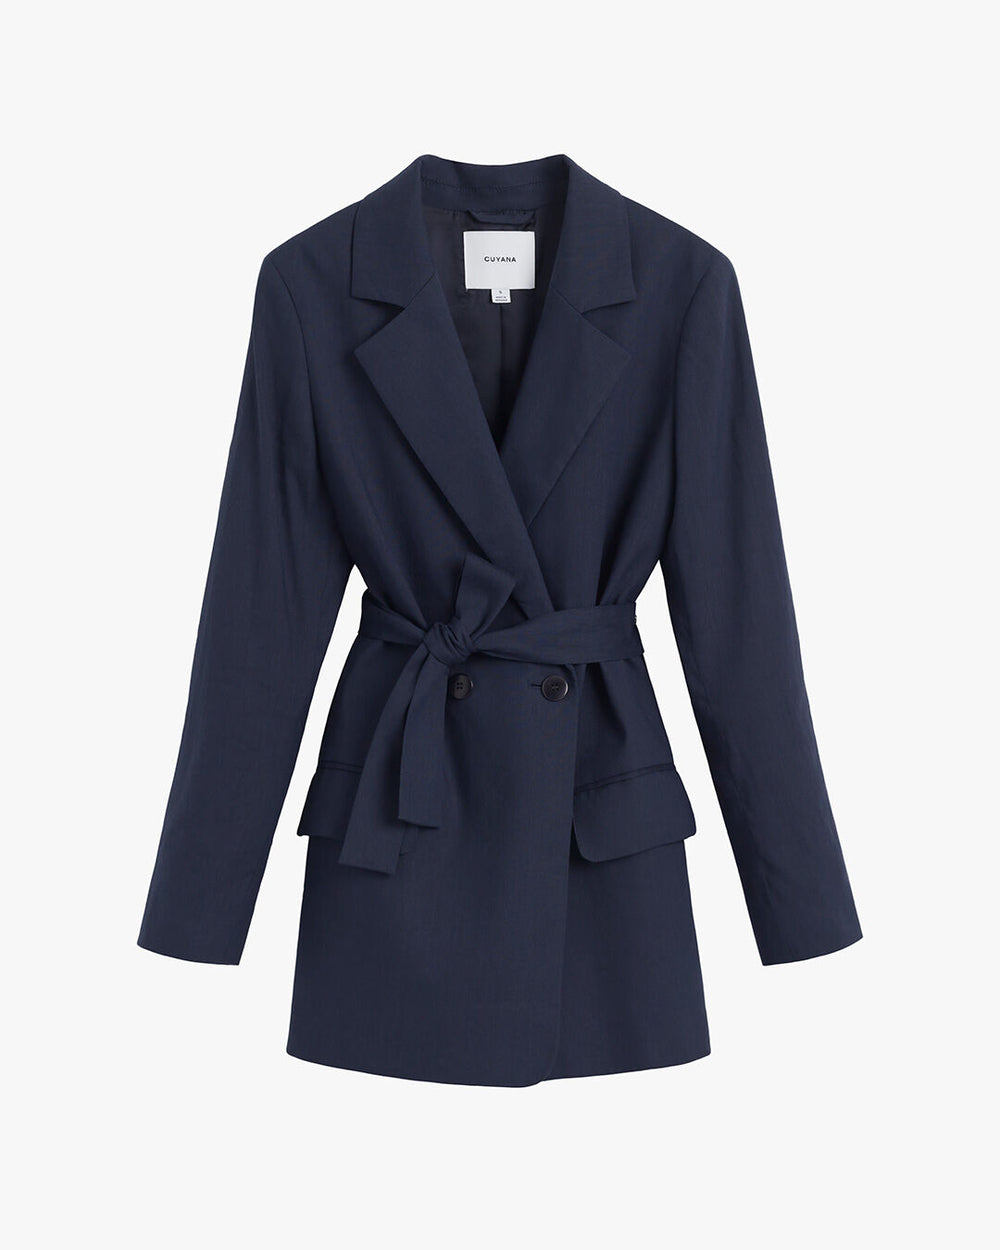 Belted blazer with lapels and a single button visible.